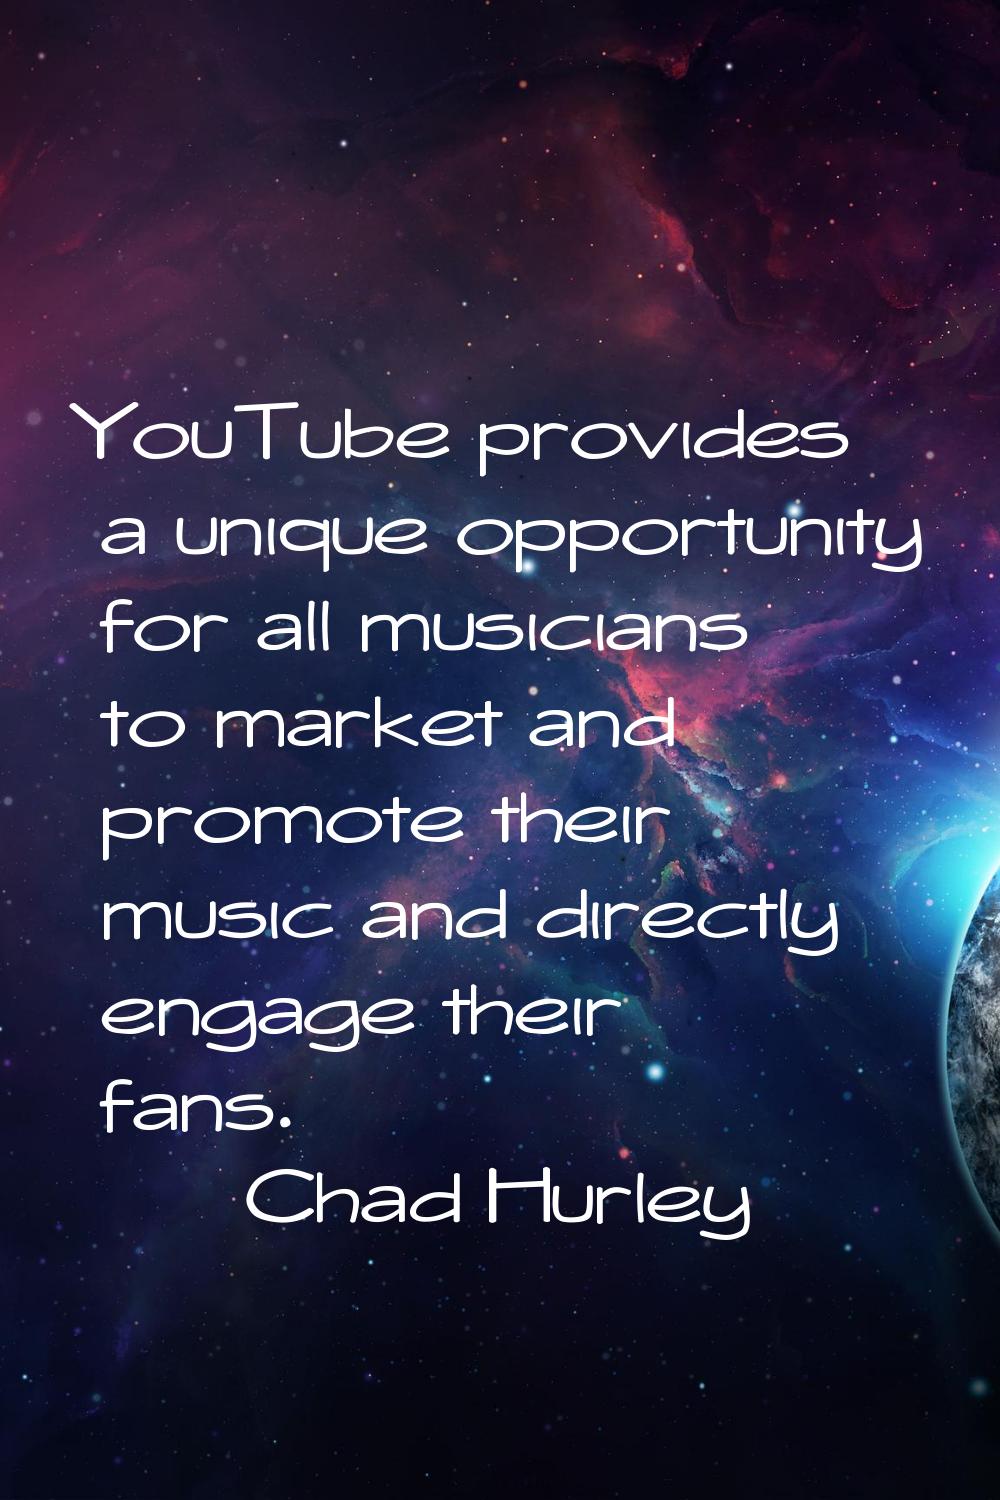 YouTube provides a unique opportunity for all musicians to market and promote their music and direc